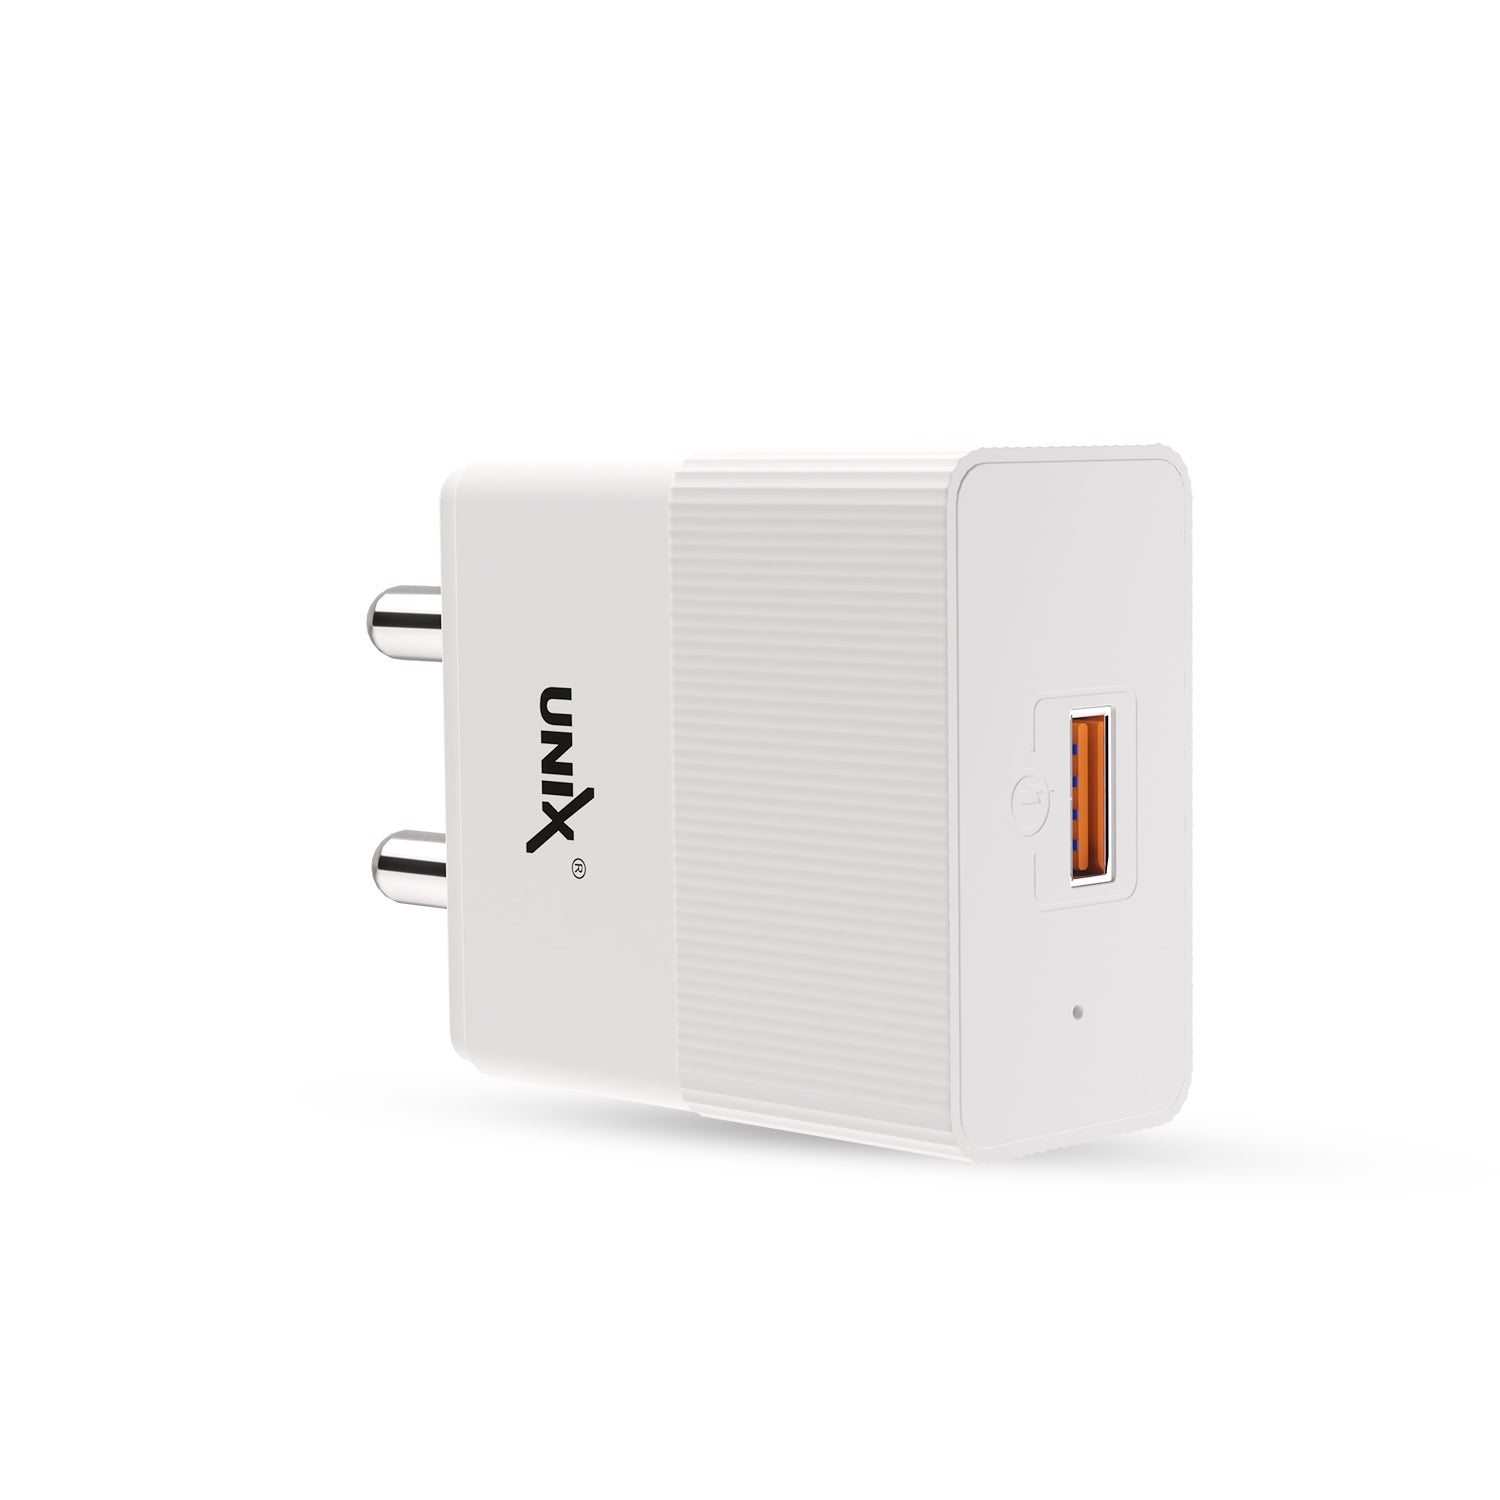 Unix UX-111 - Best Fast Charger for Android